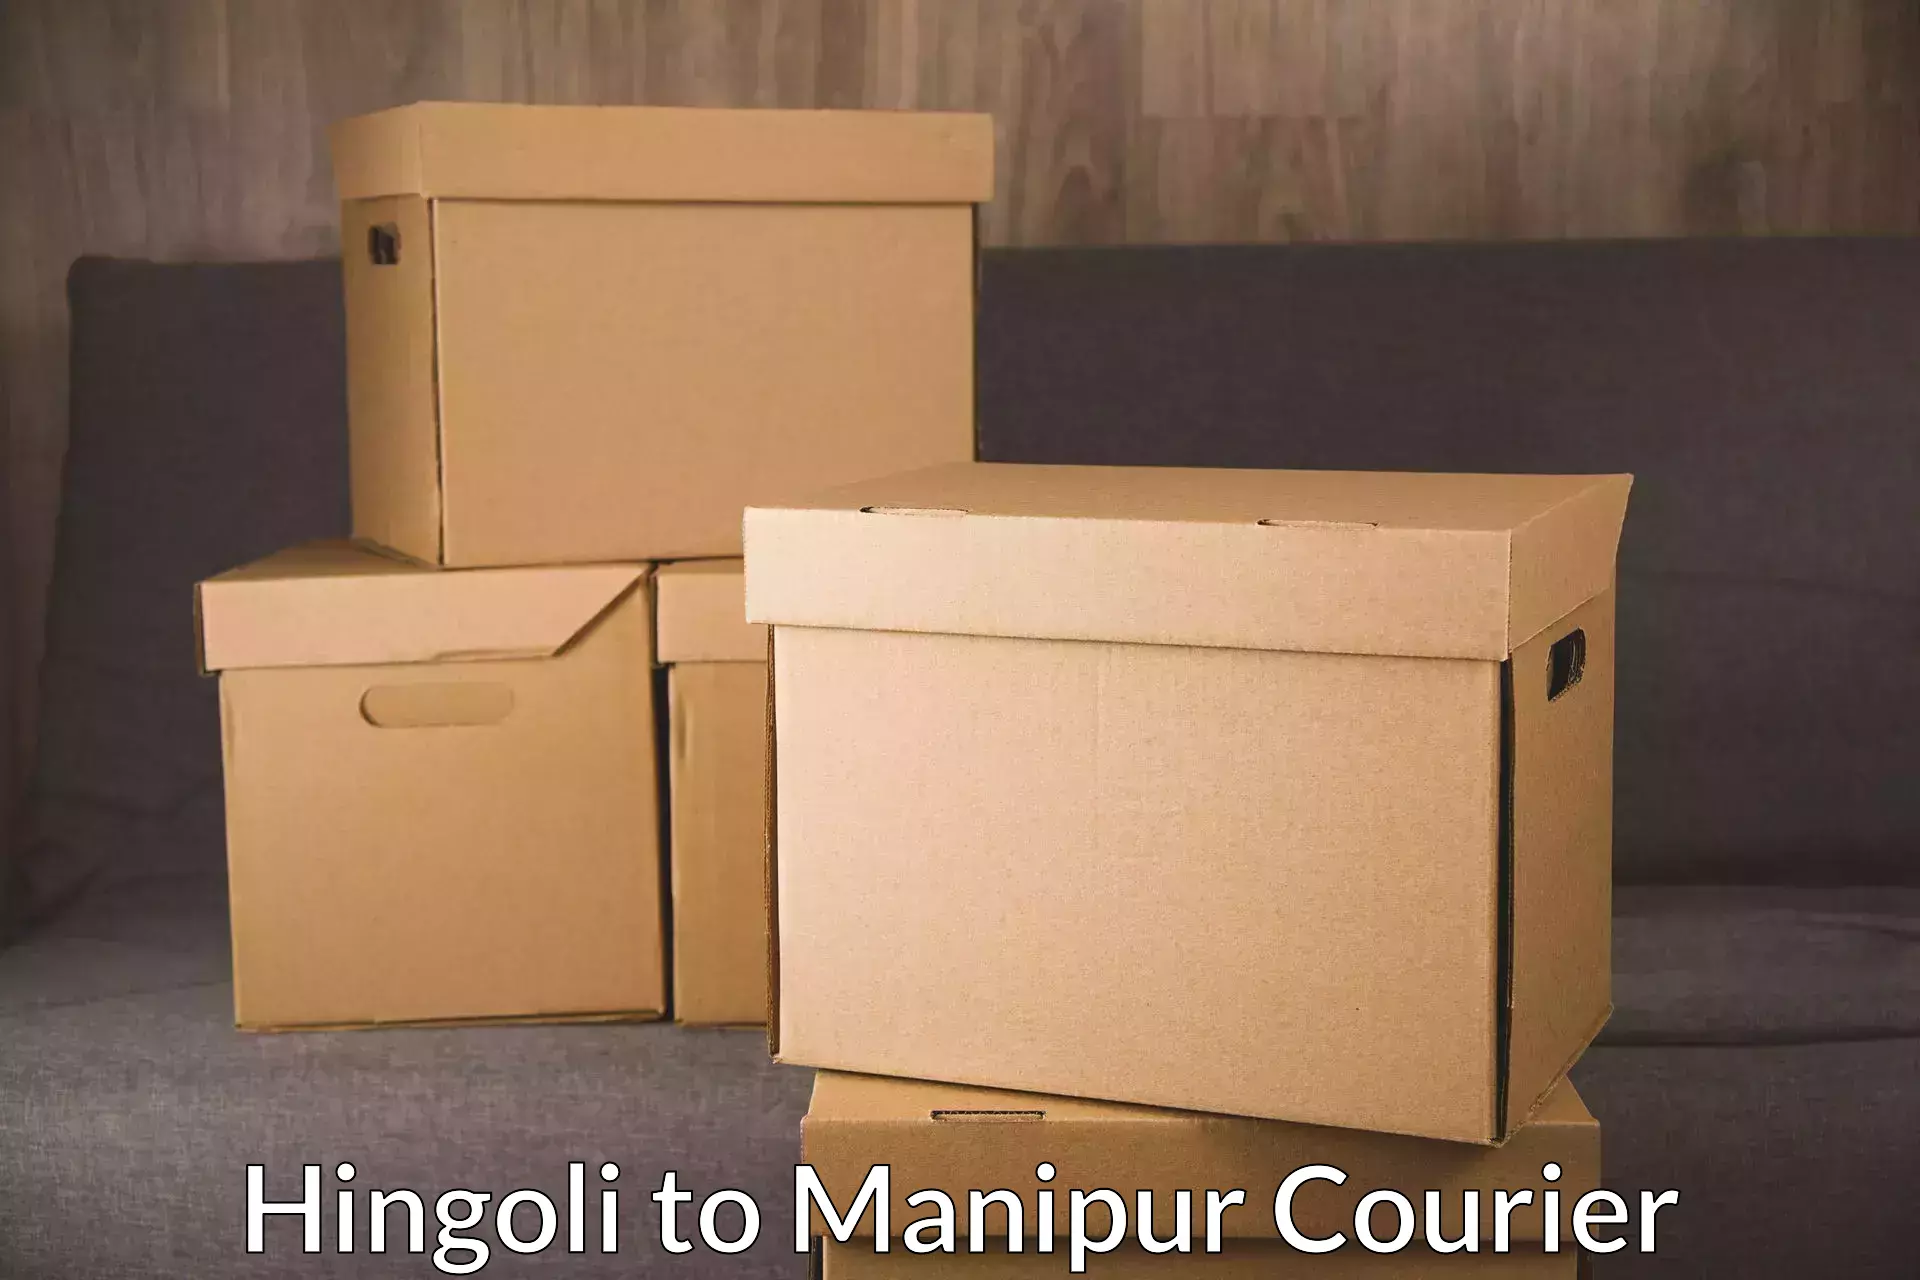 Comprehensive shipping network Hingoli to Manipur